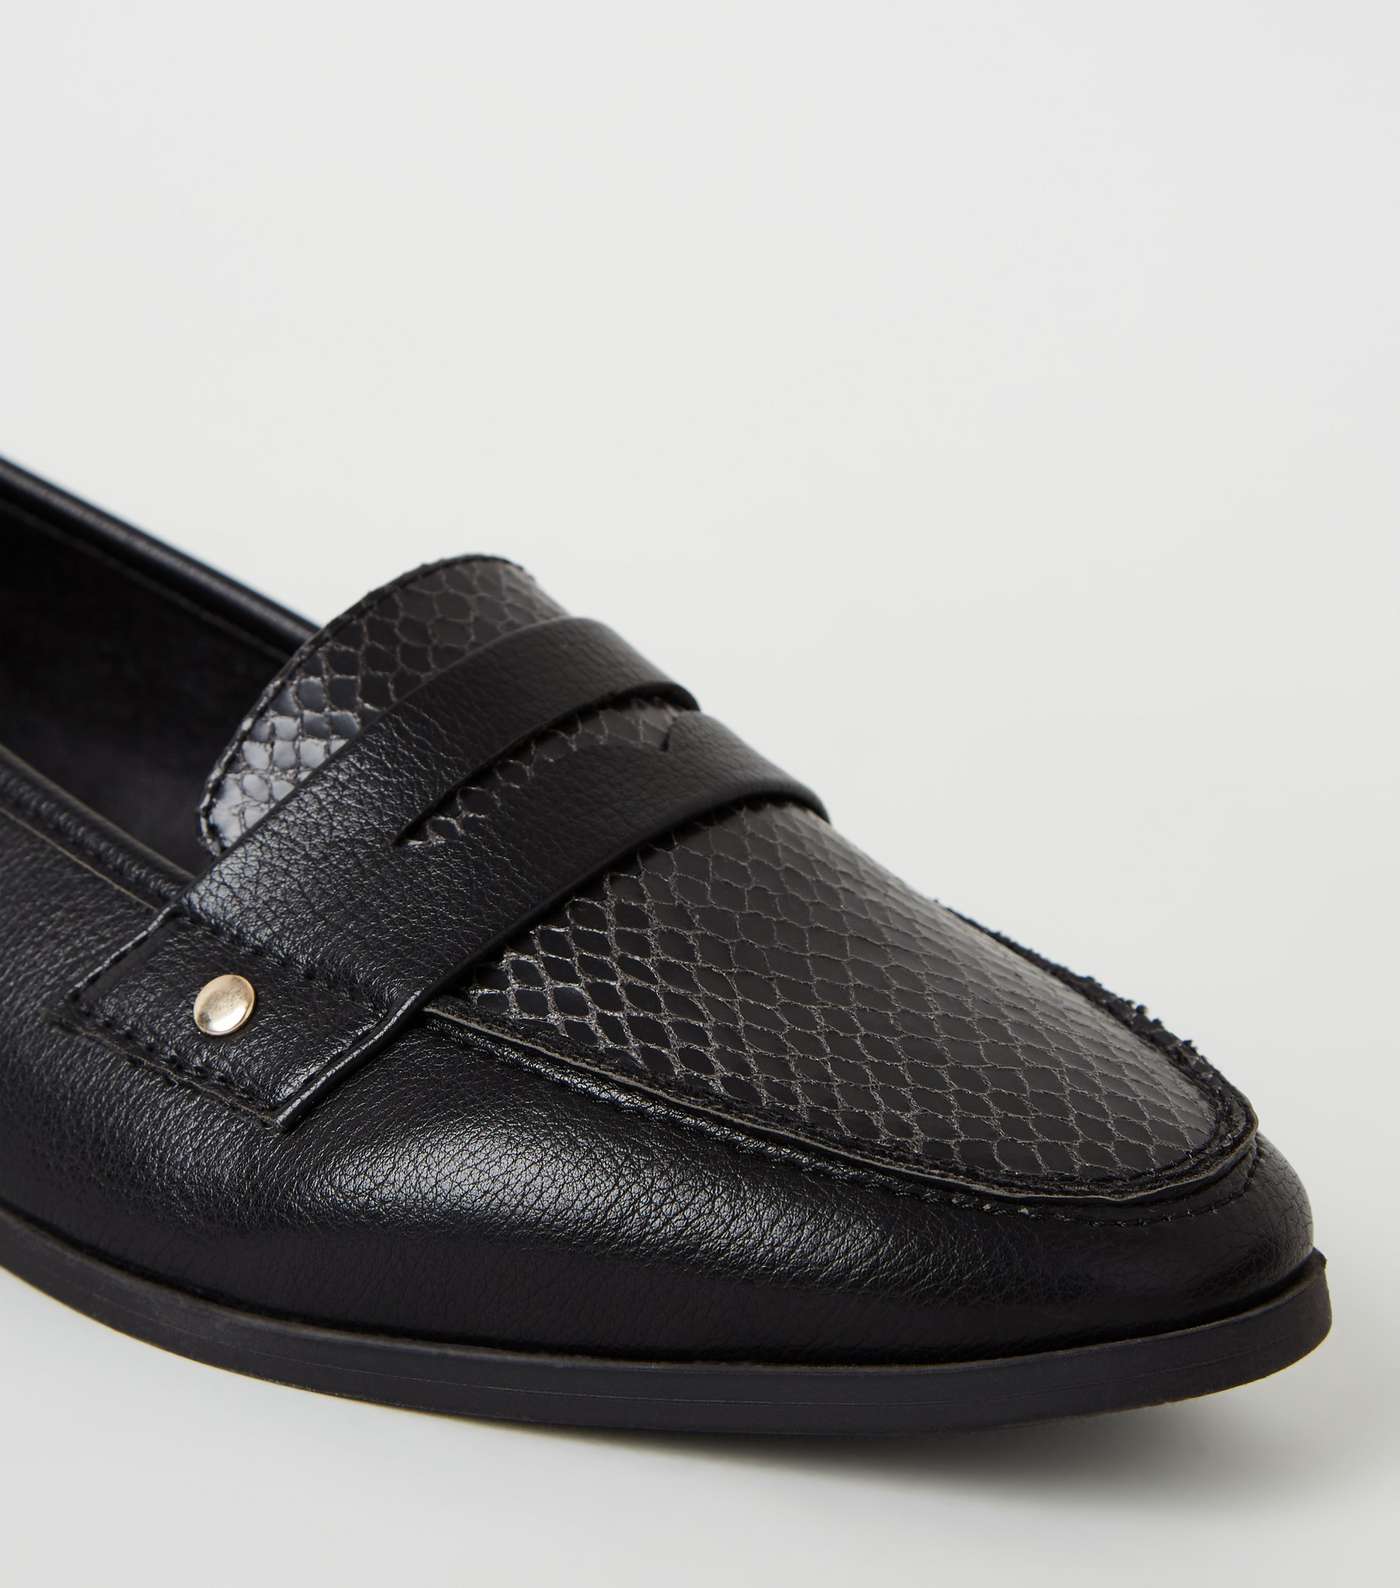 Black Leather-Look Faux Snake Loafers Image 4